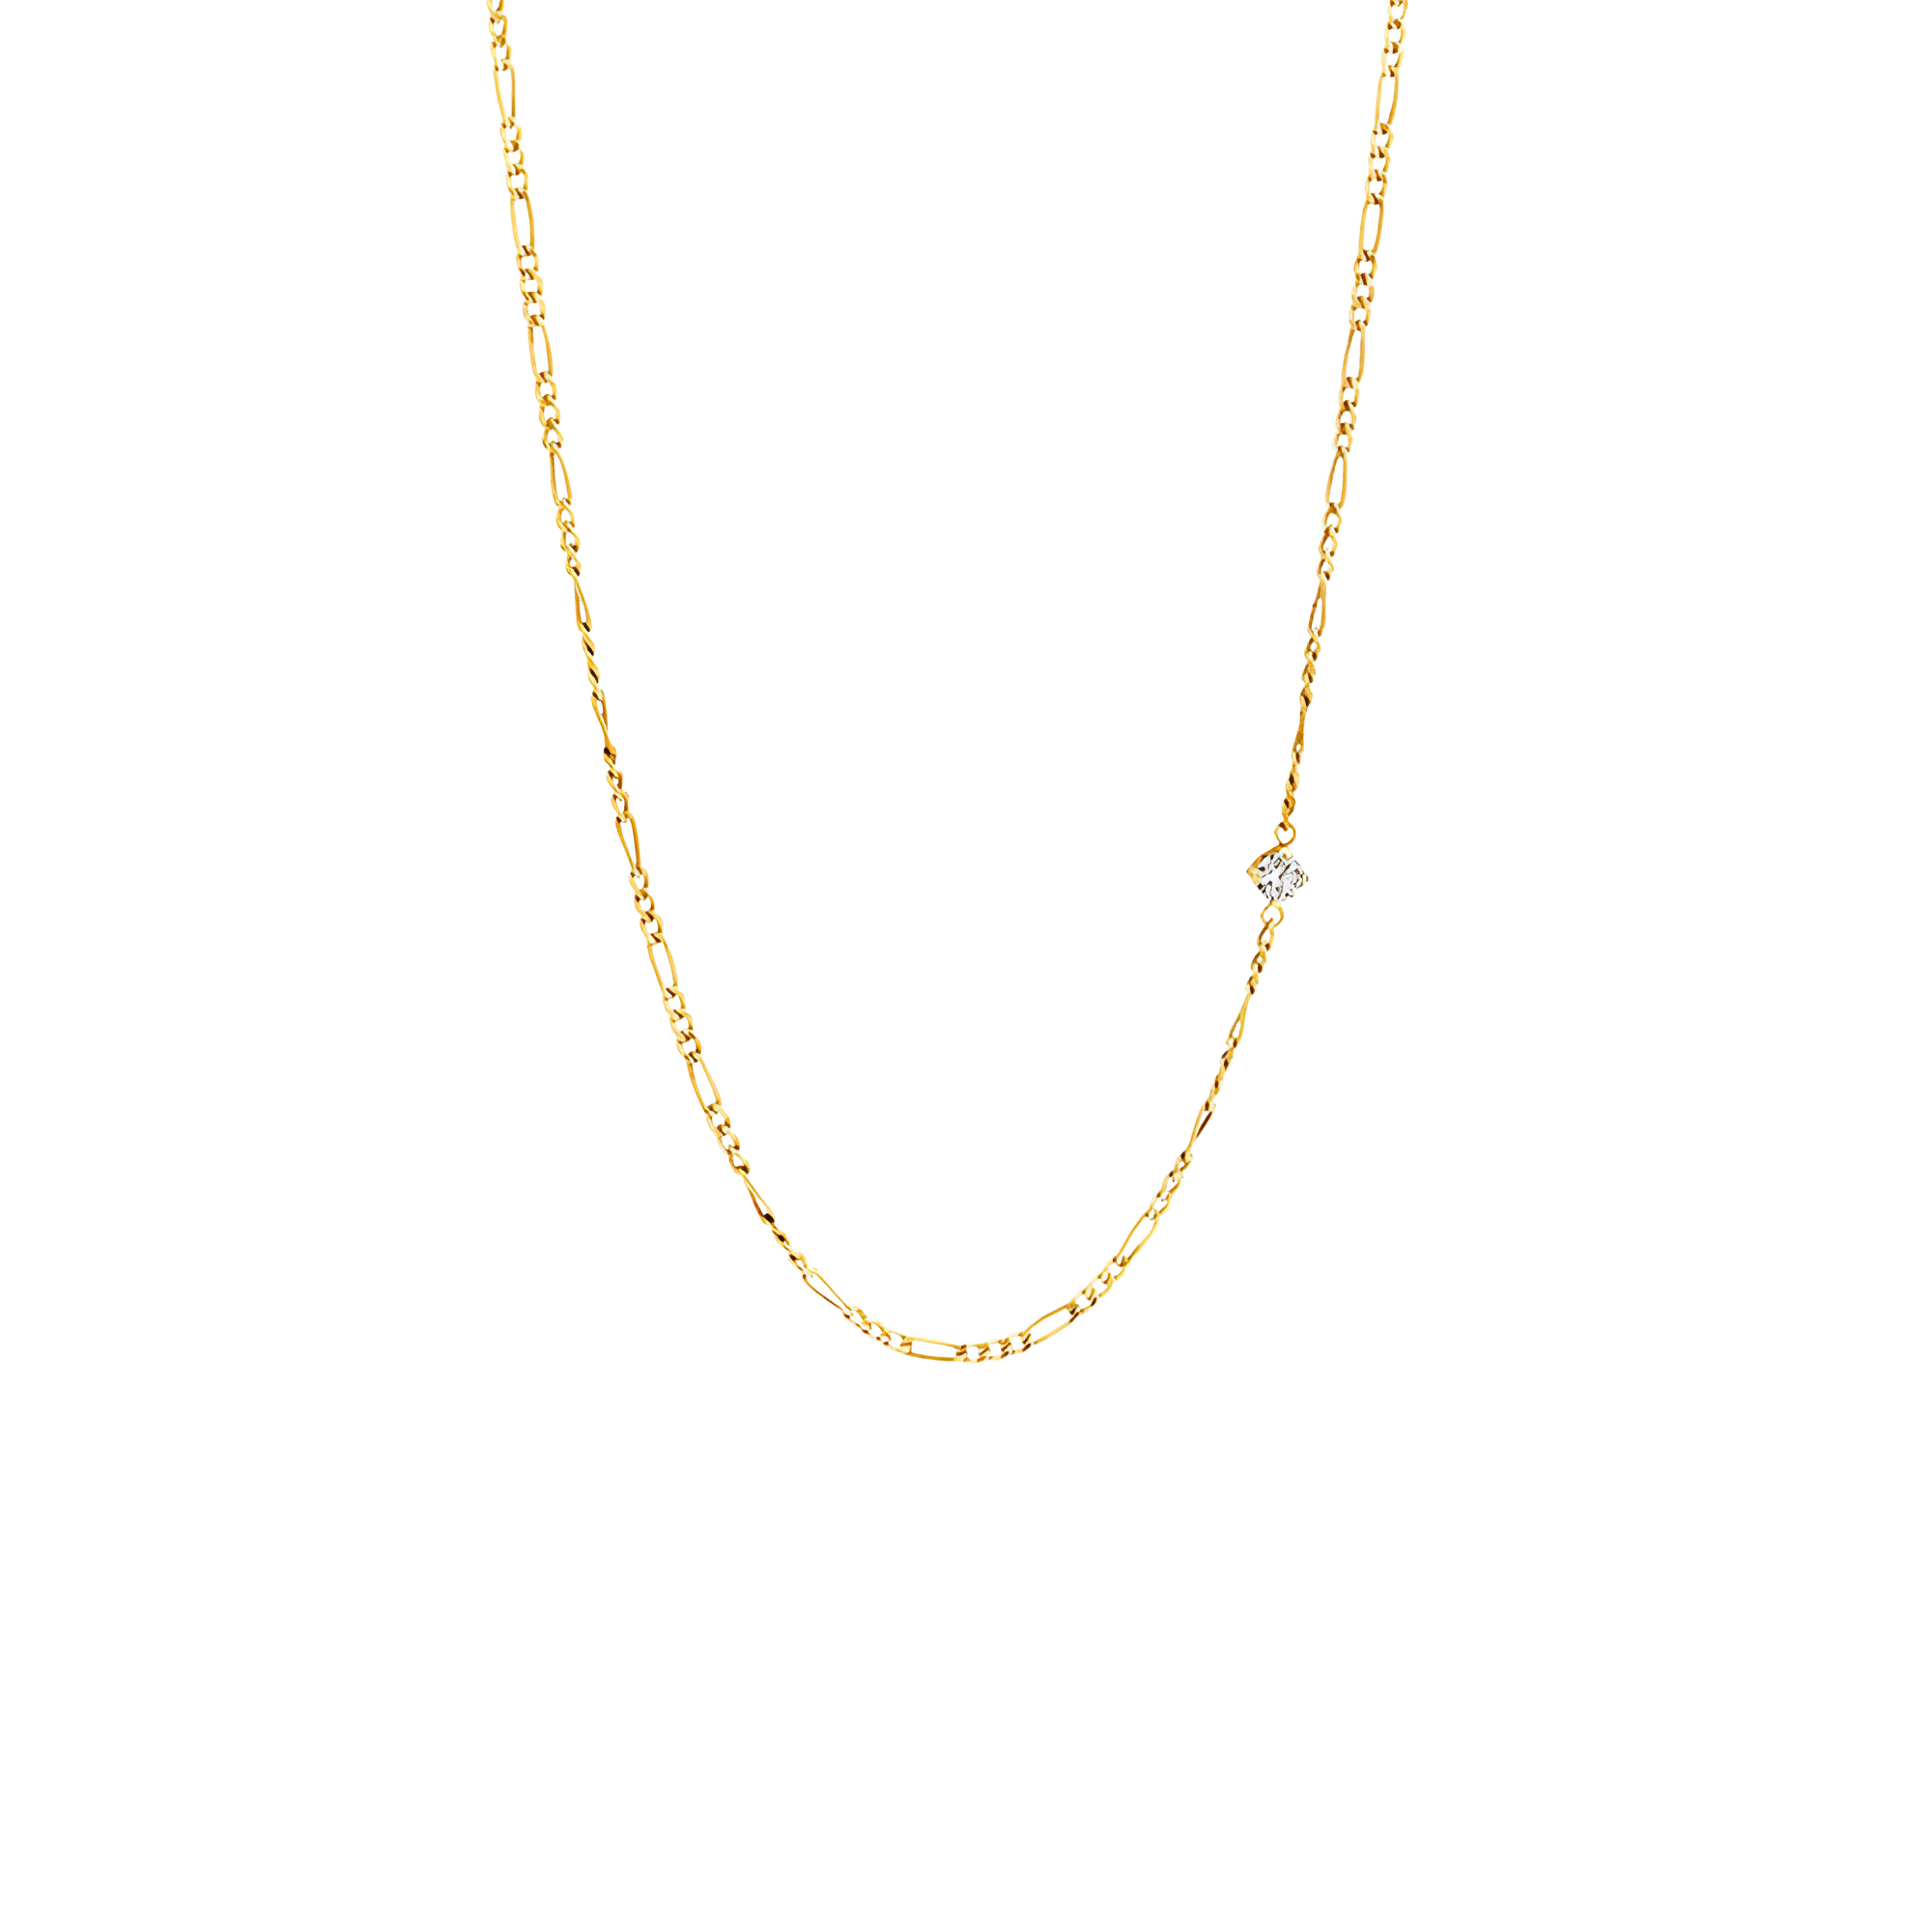 Lab-Grown Diamond Flawless Chain Necklace | 18K yellow gold / 0.1ct  | Jewelry | The Future Rocks